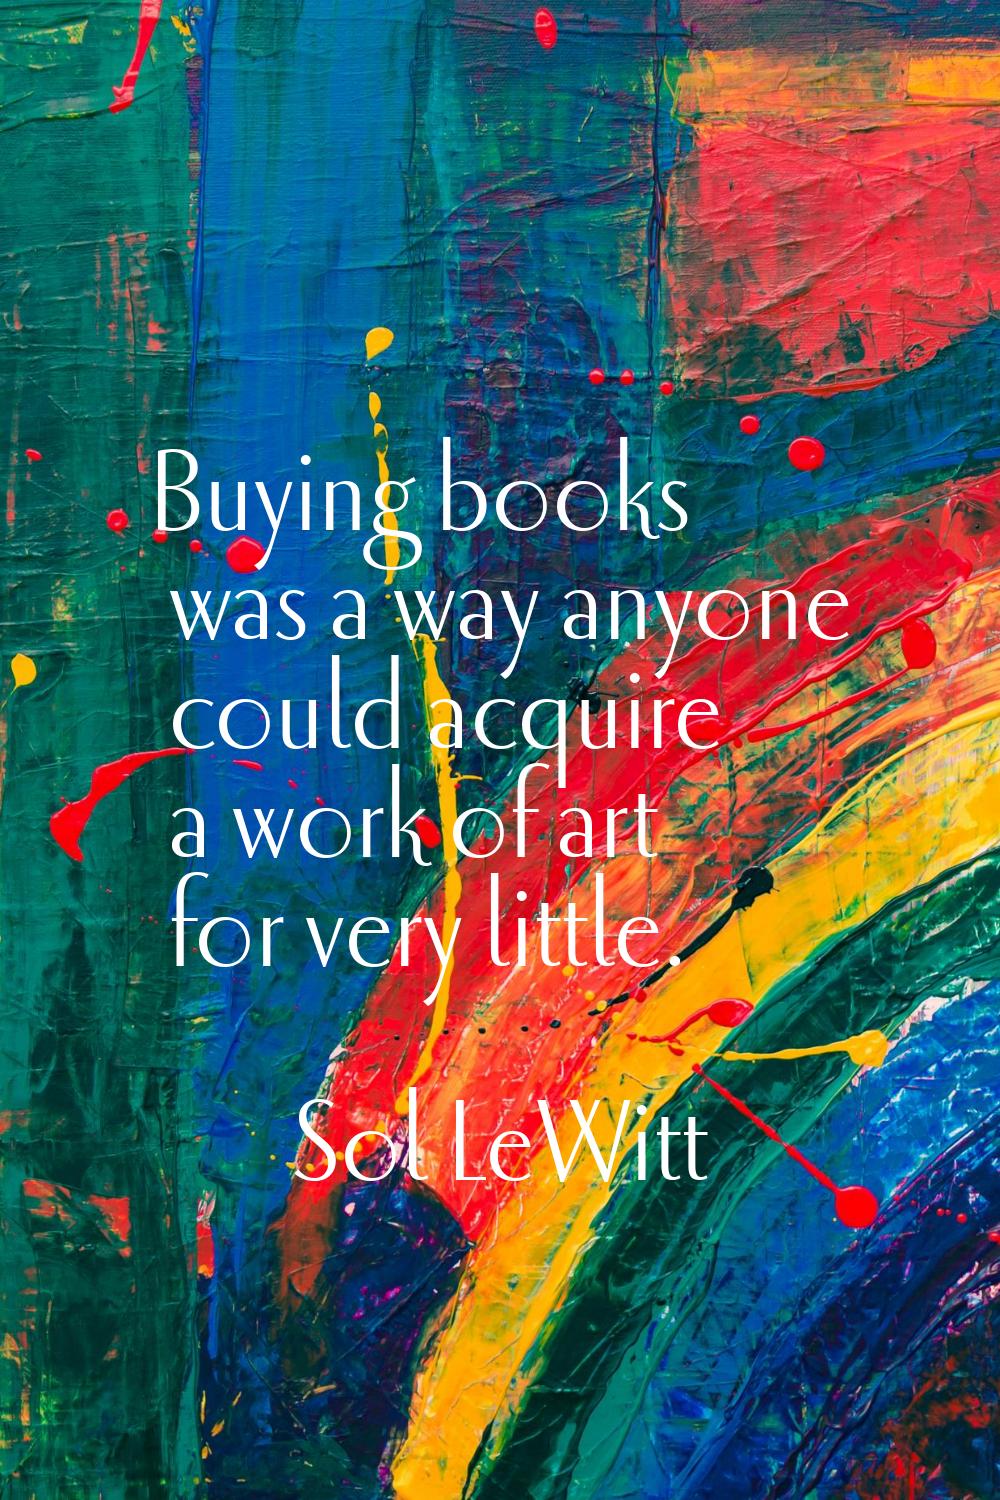 Buying books was a way anyone could acquire a work of art for very little.